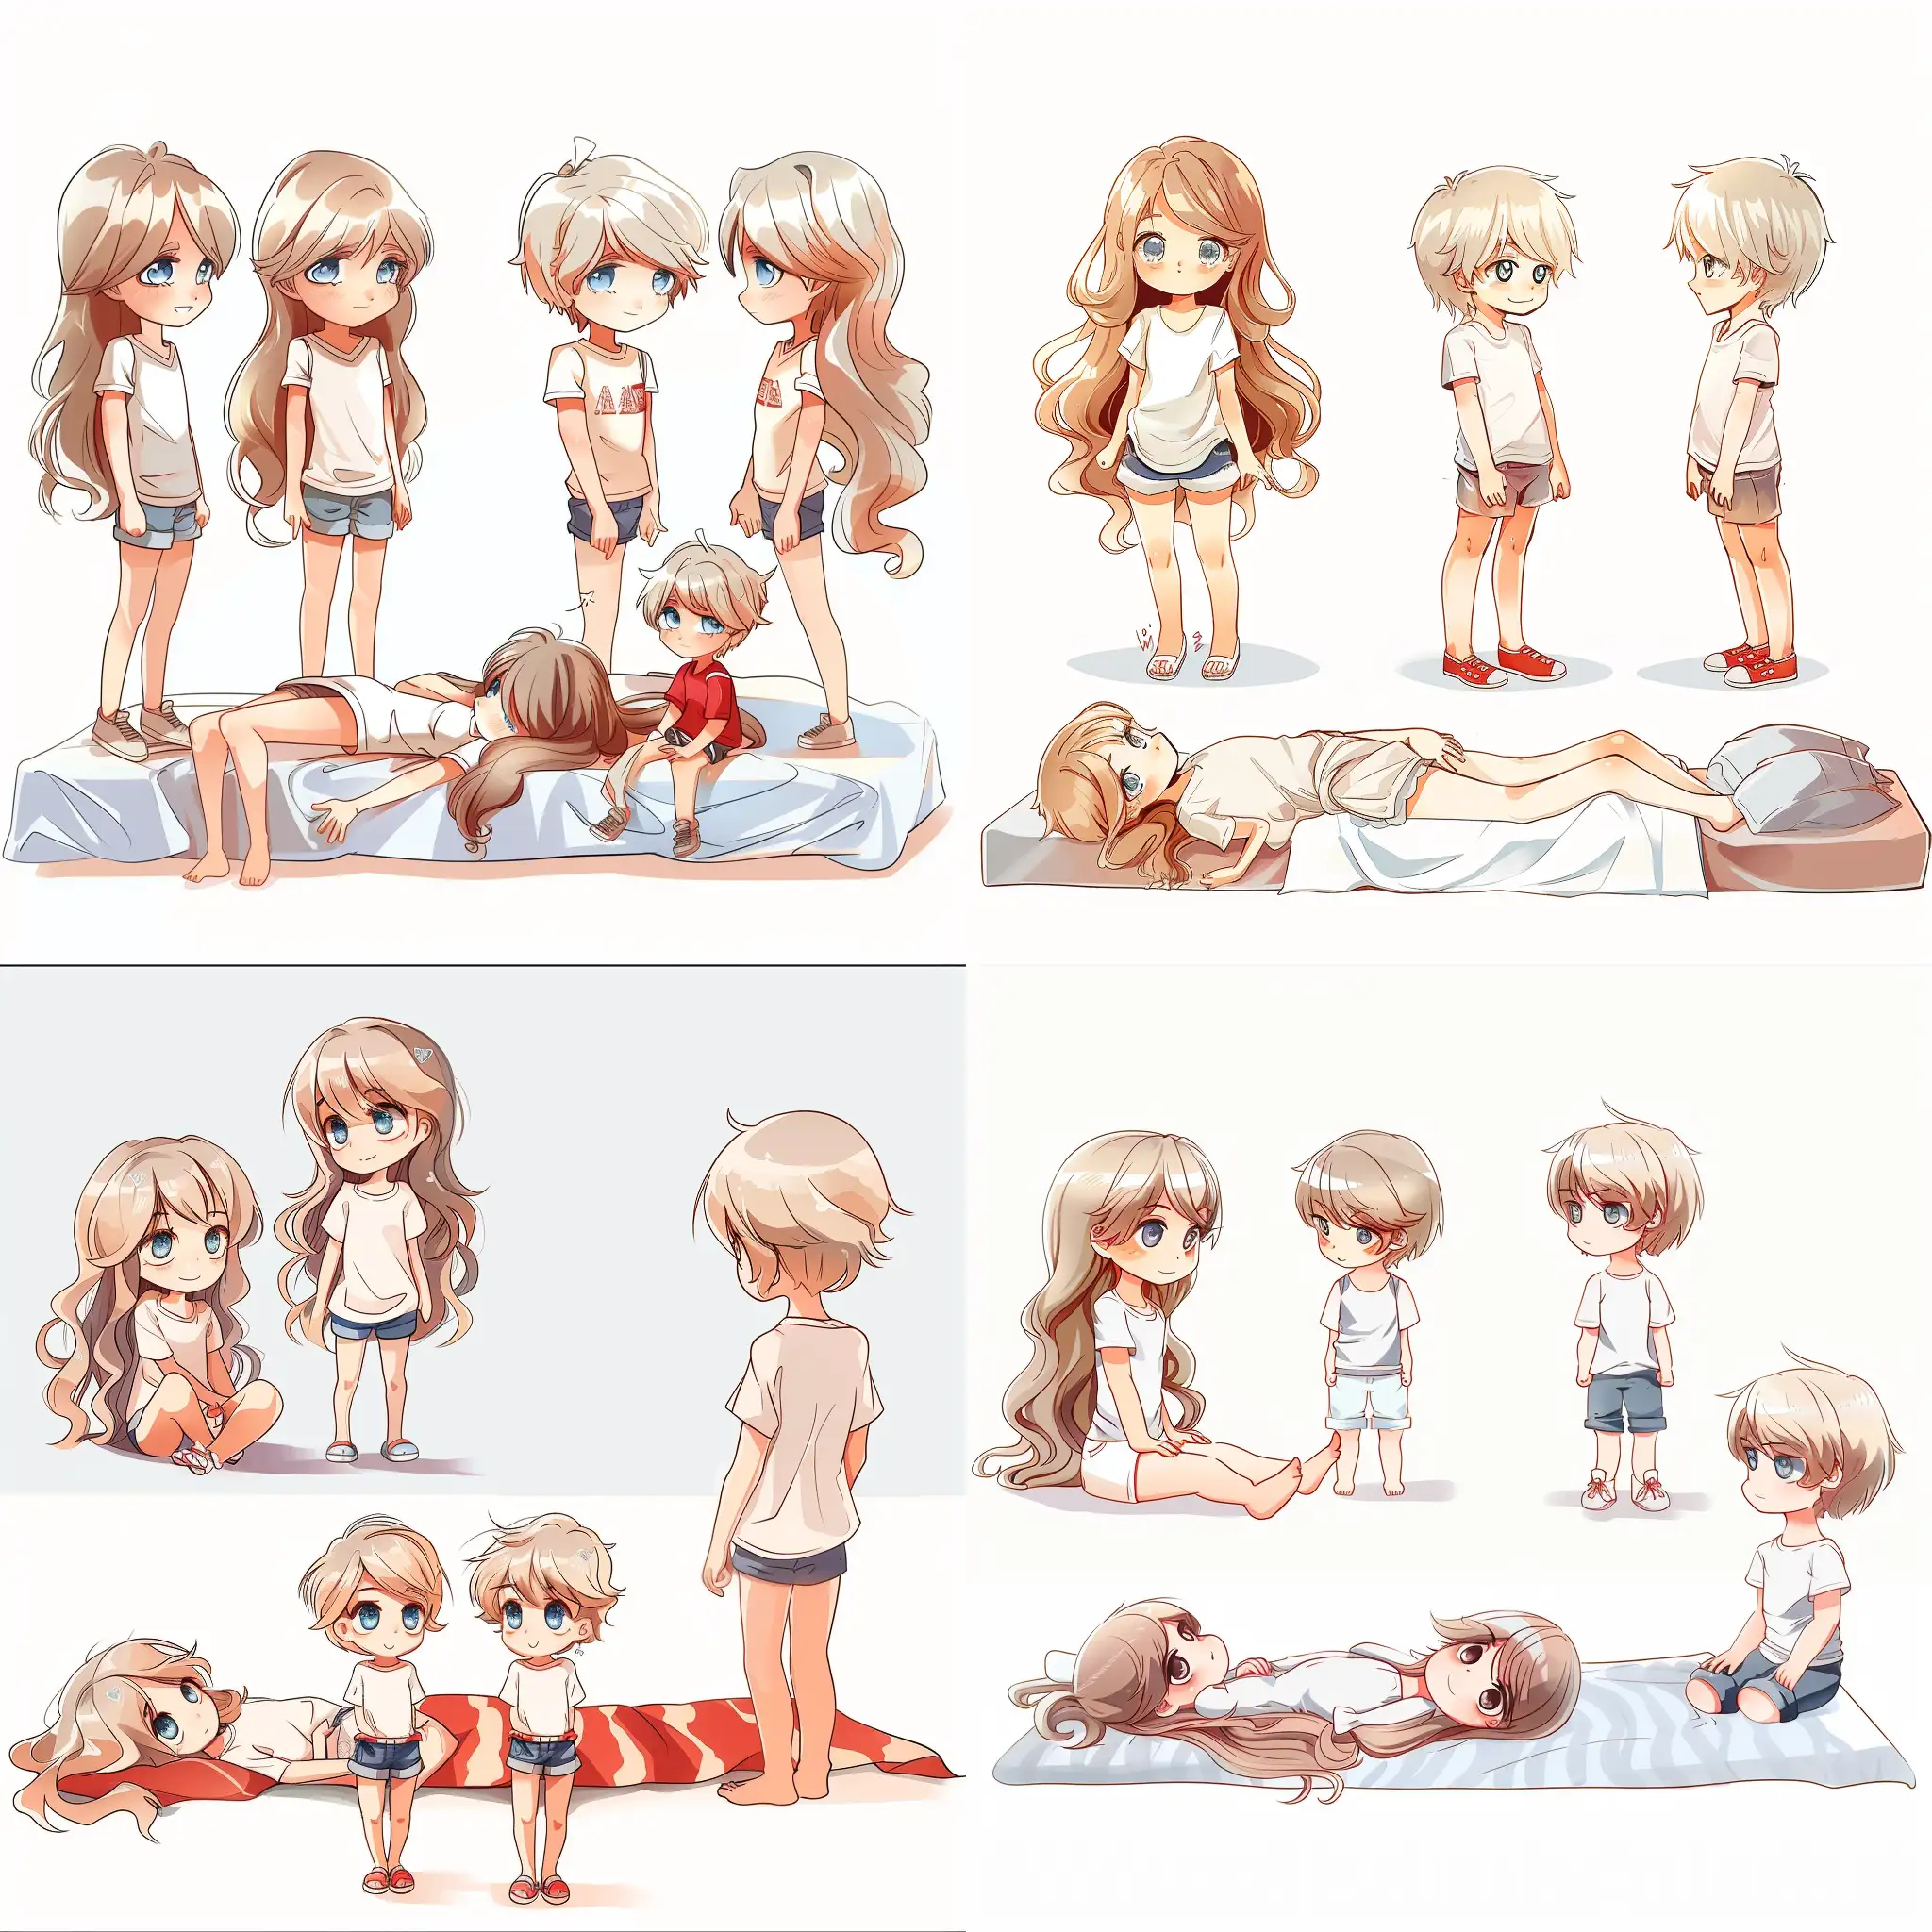 Chibi-Style-Siblings-Adorable-9YearOld-Girl-and-6YearOld-Boy-on-Bed